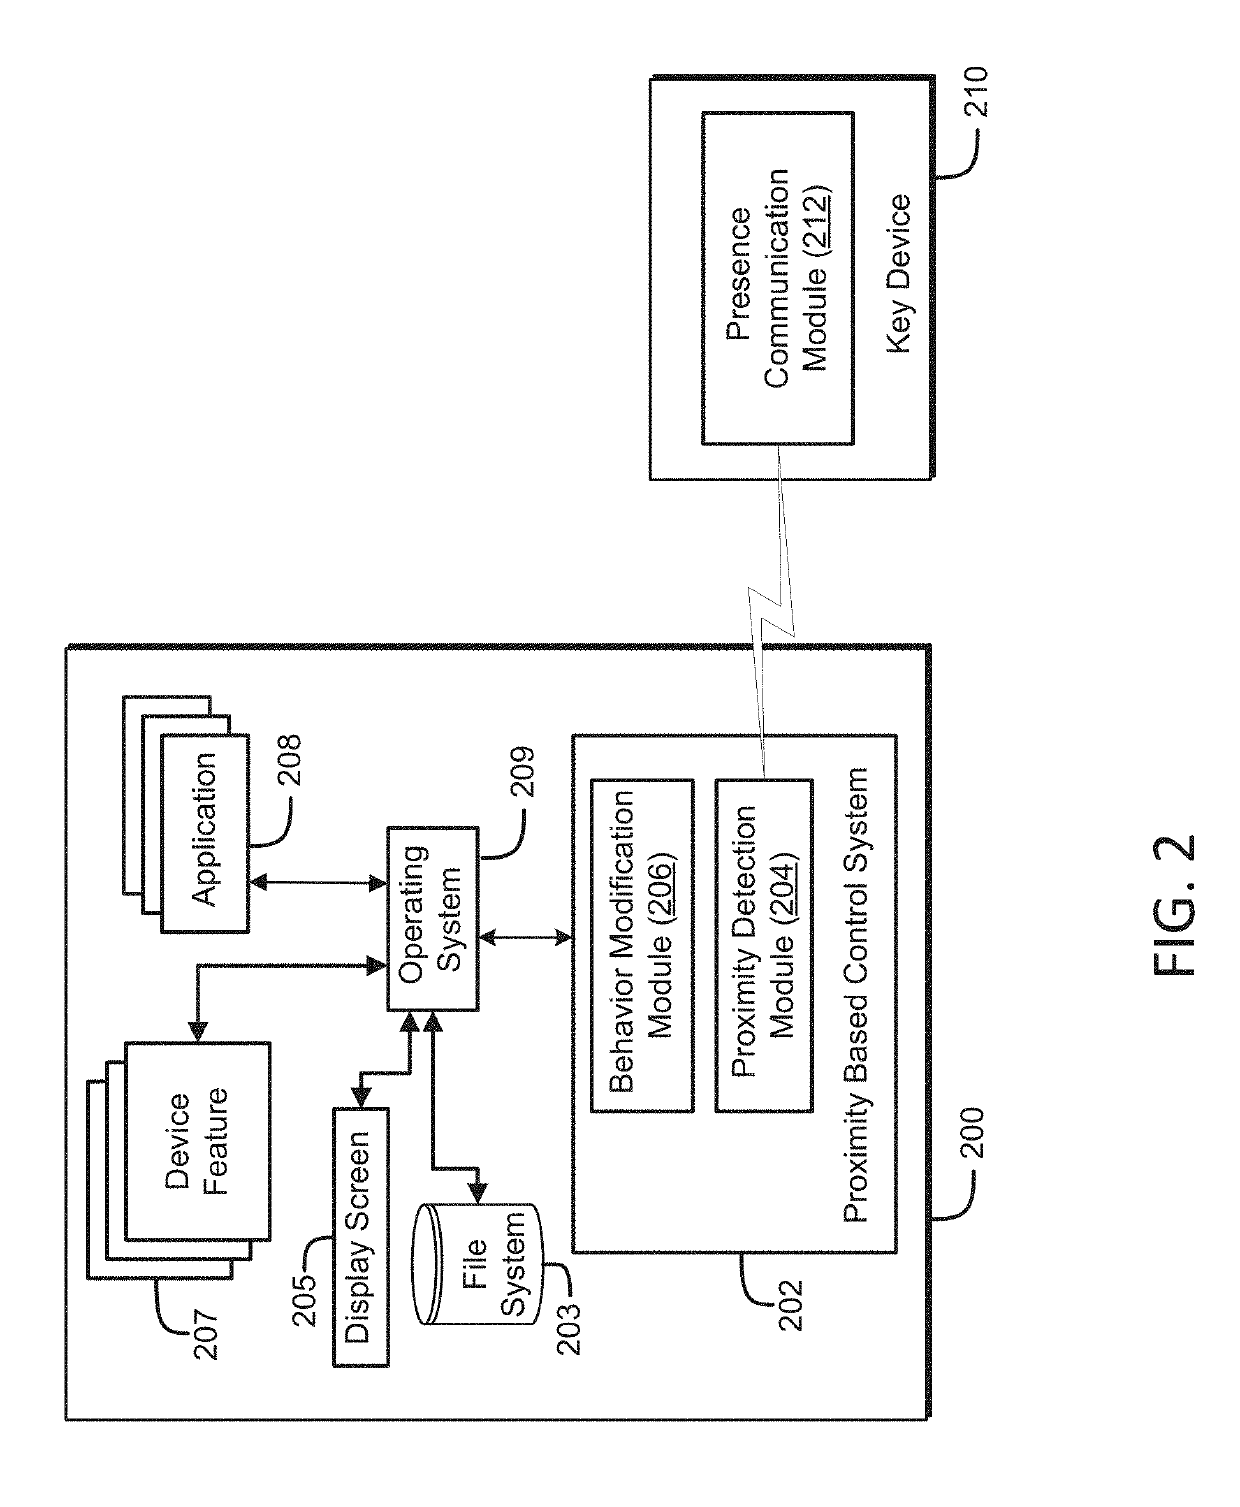 Method for changing mobile communication device functionality based upon receipt of a second code